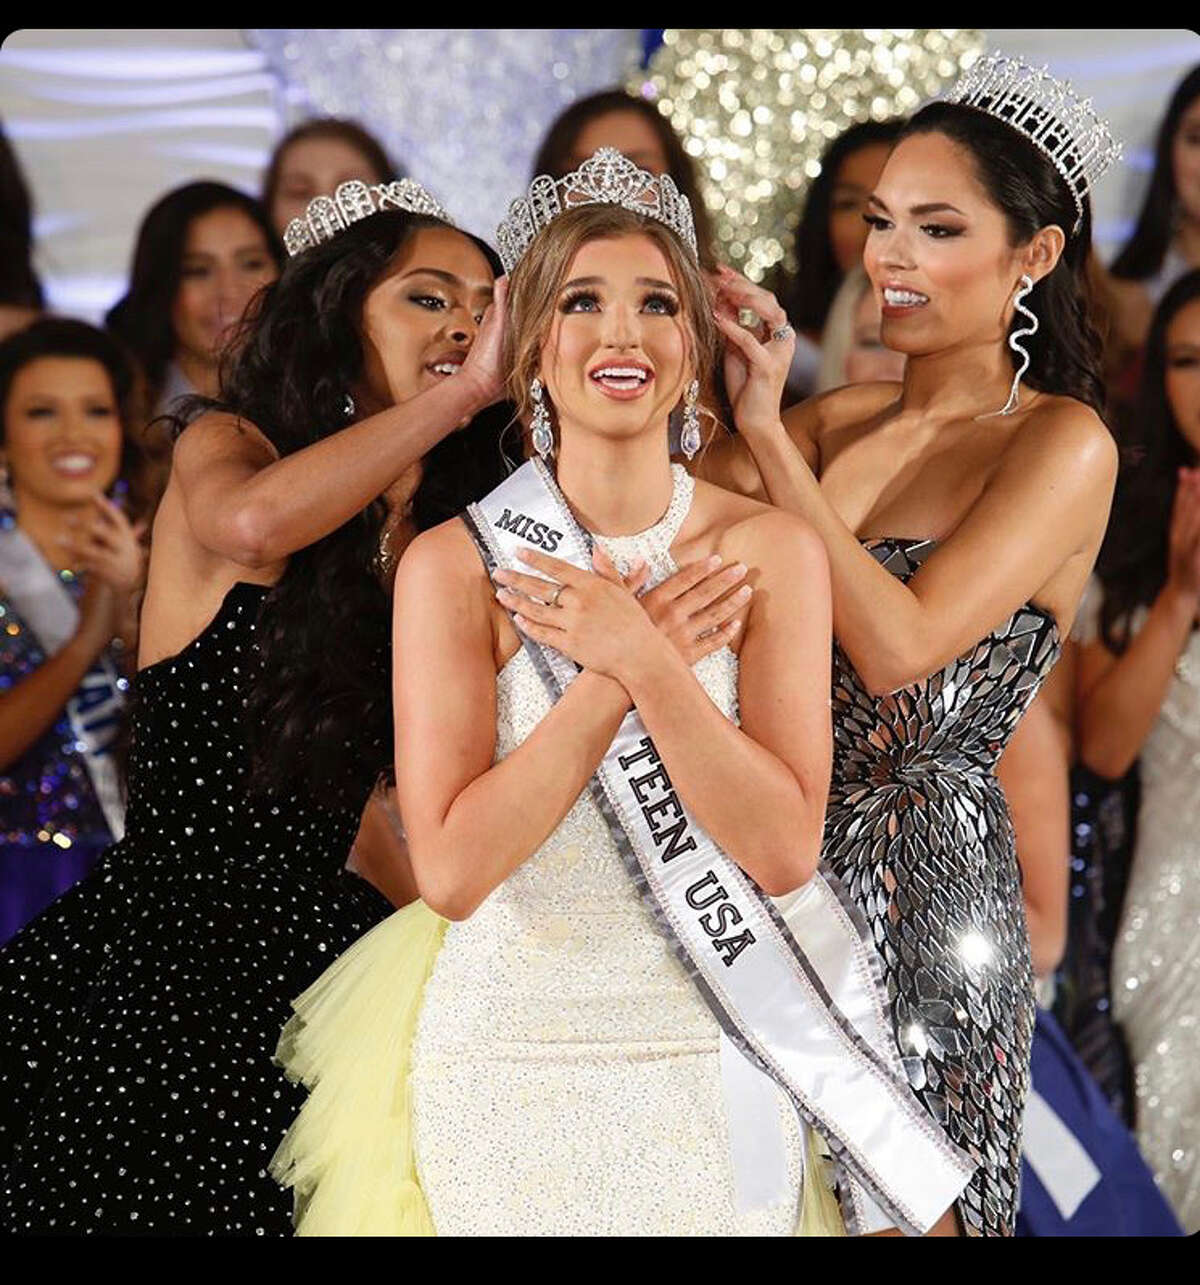 Laredo's Anissa Mendez took home the crown and the title of Miss Texas Teen USA after this weekend's pageant in Houston, Texas.